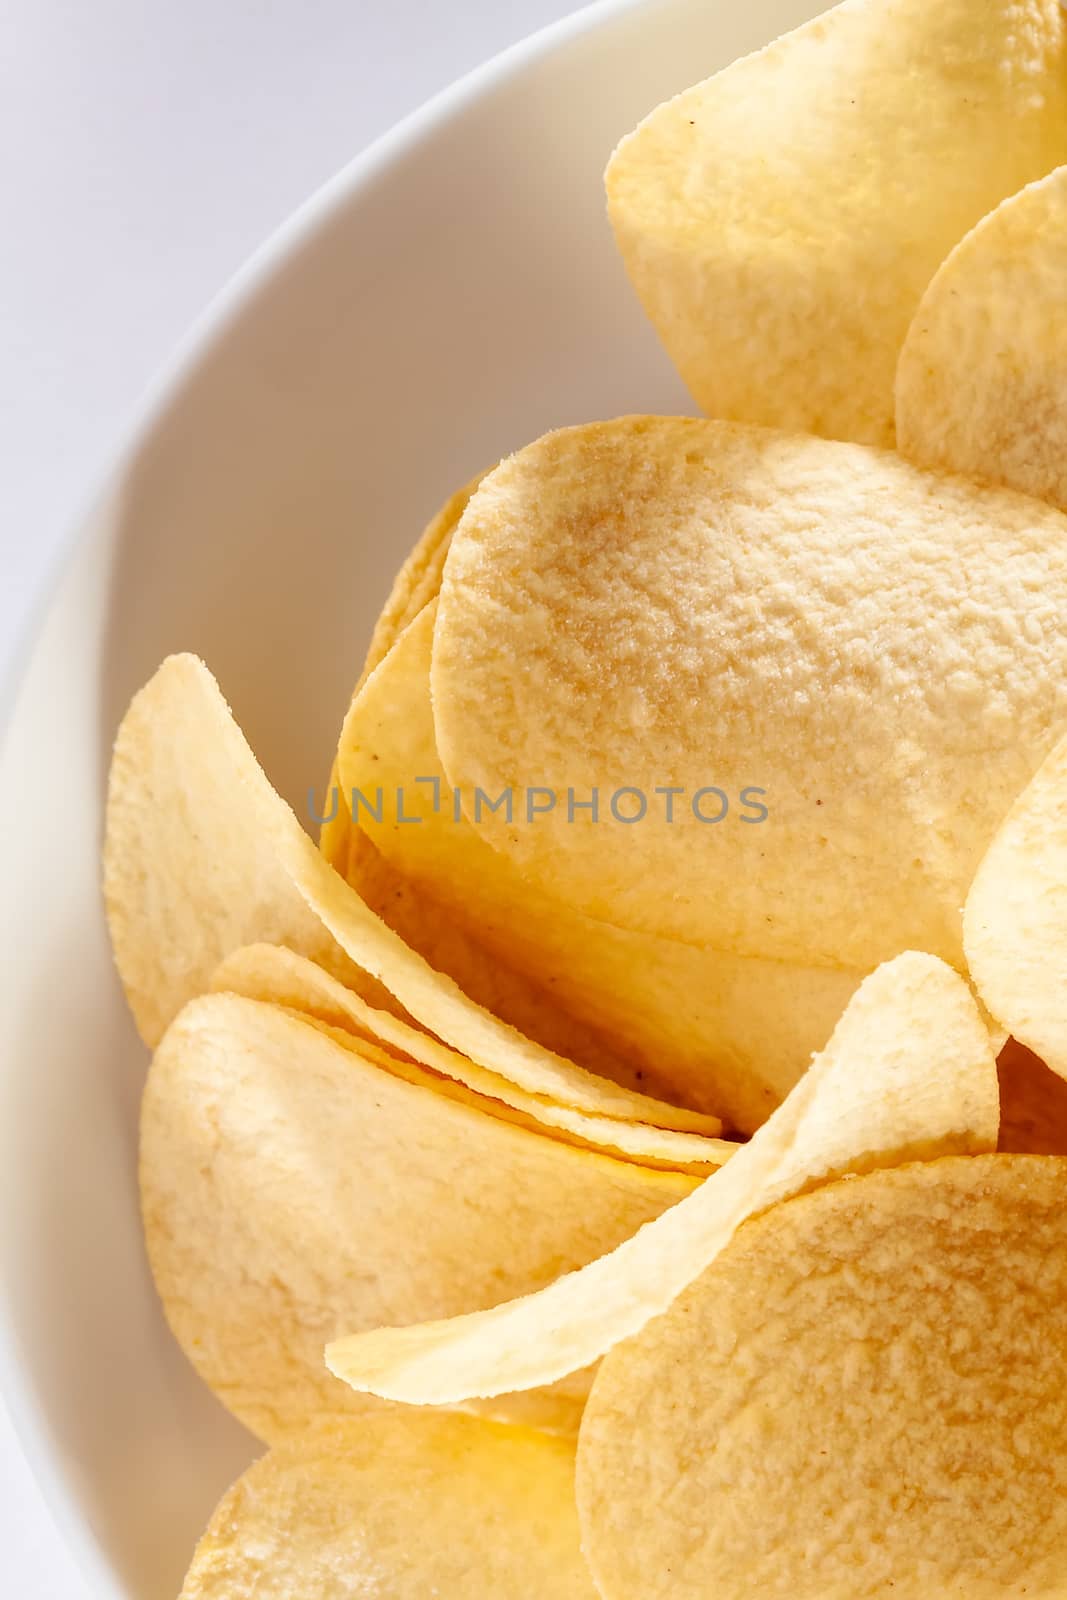 An image of some typical crisps in a white bowl